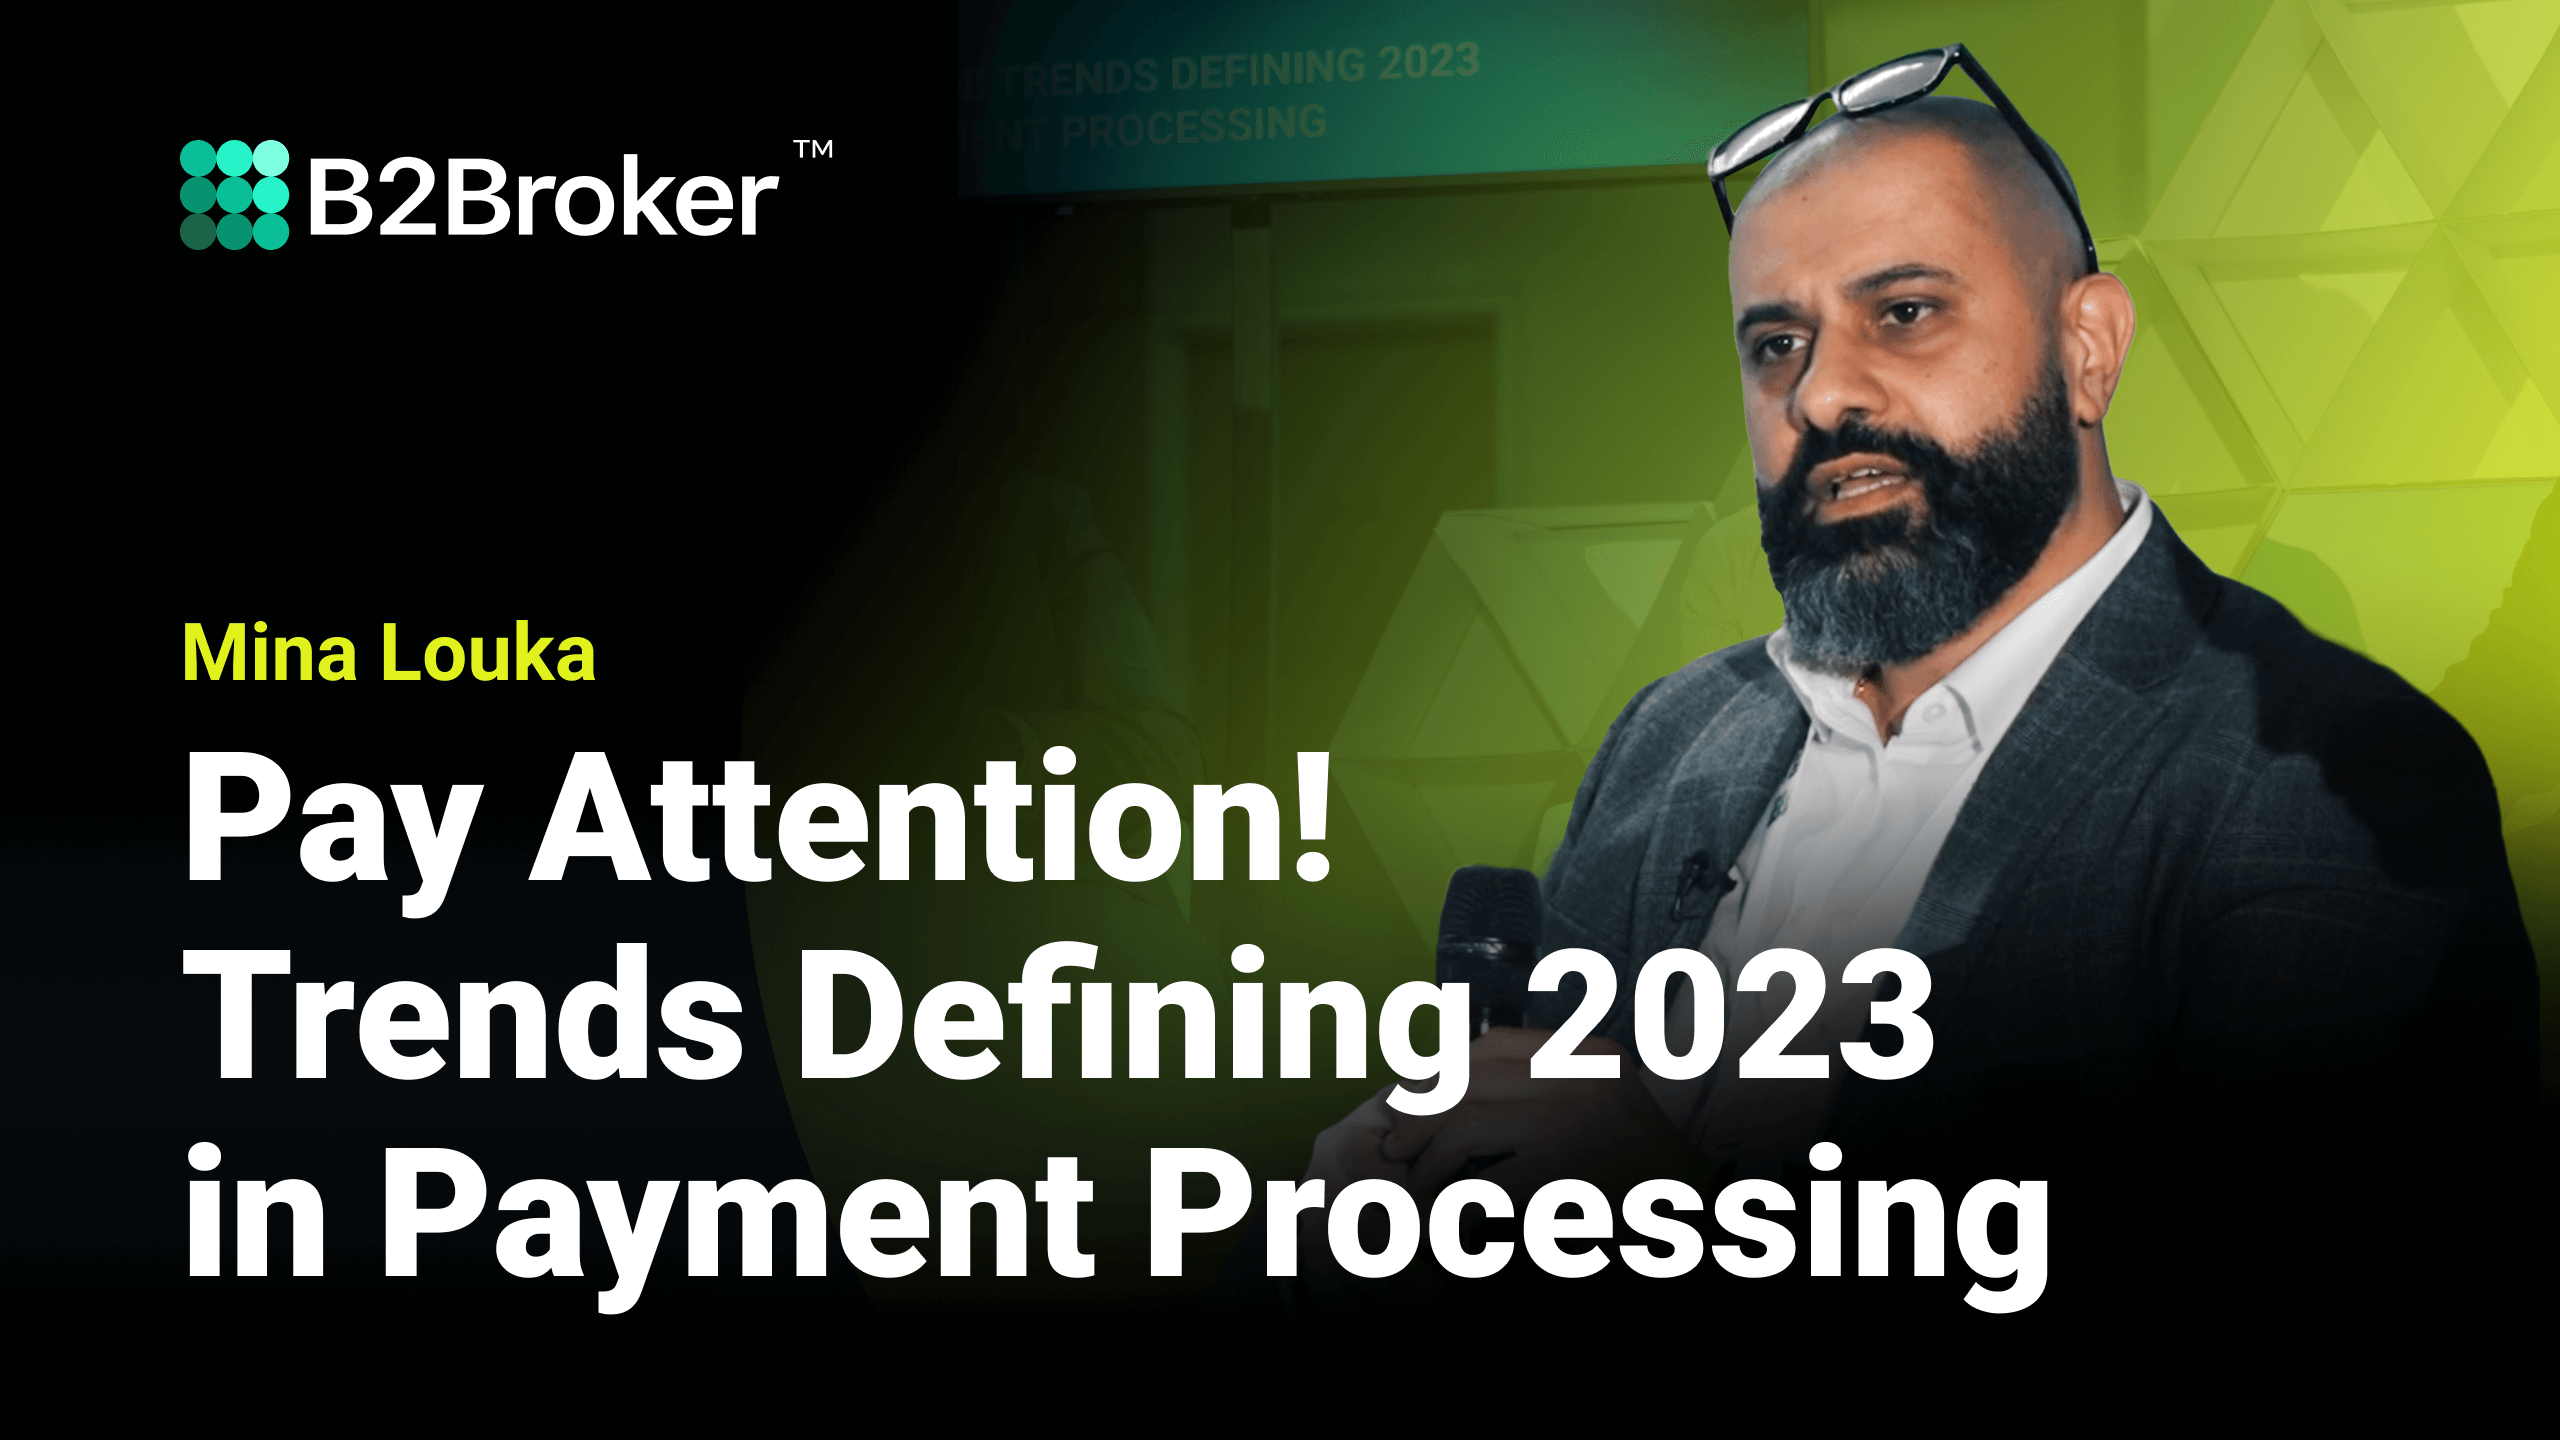 FMLS 2022 | Trends Defining 2023 in Payment Processing